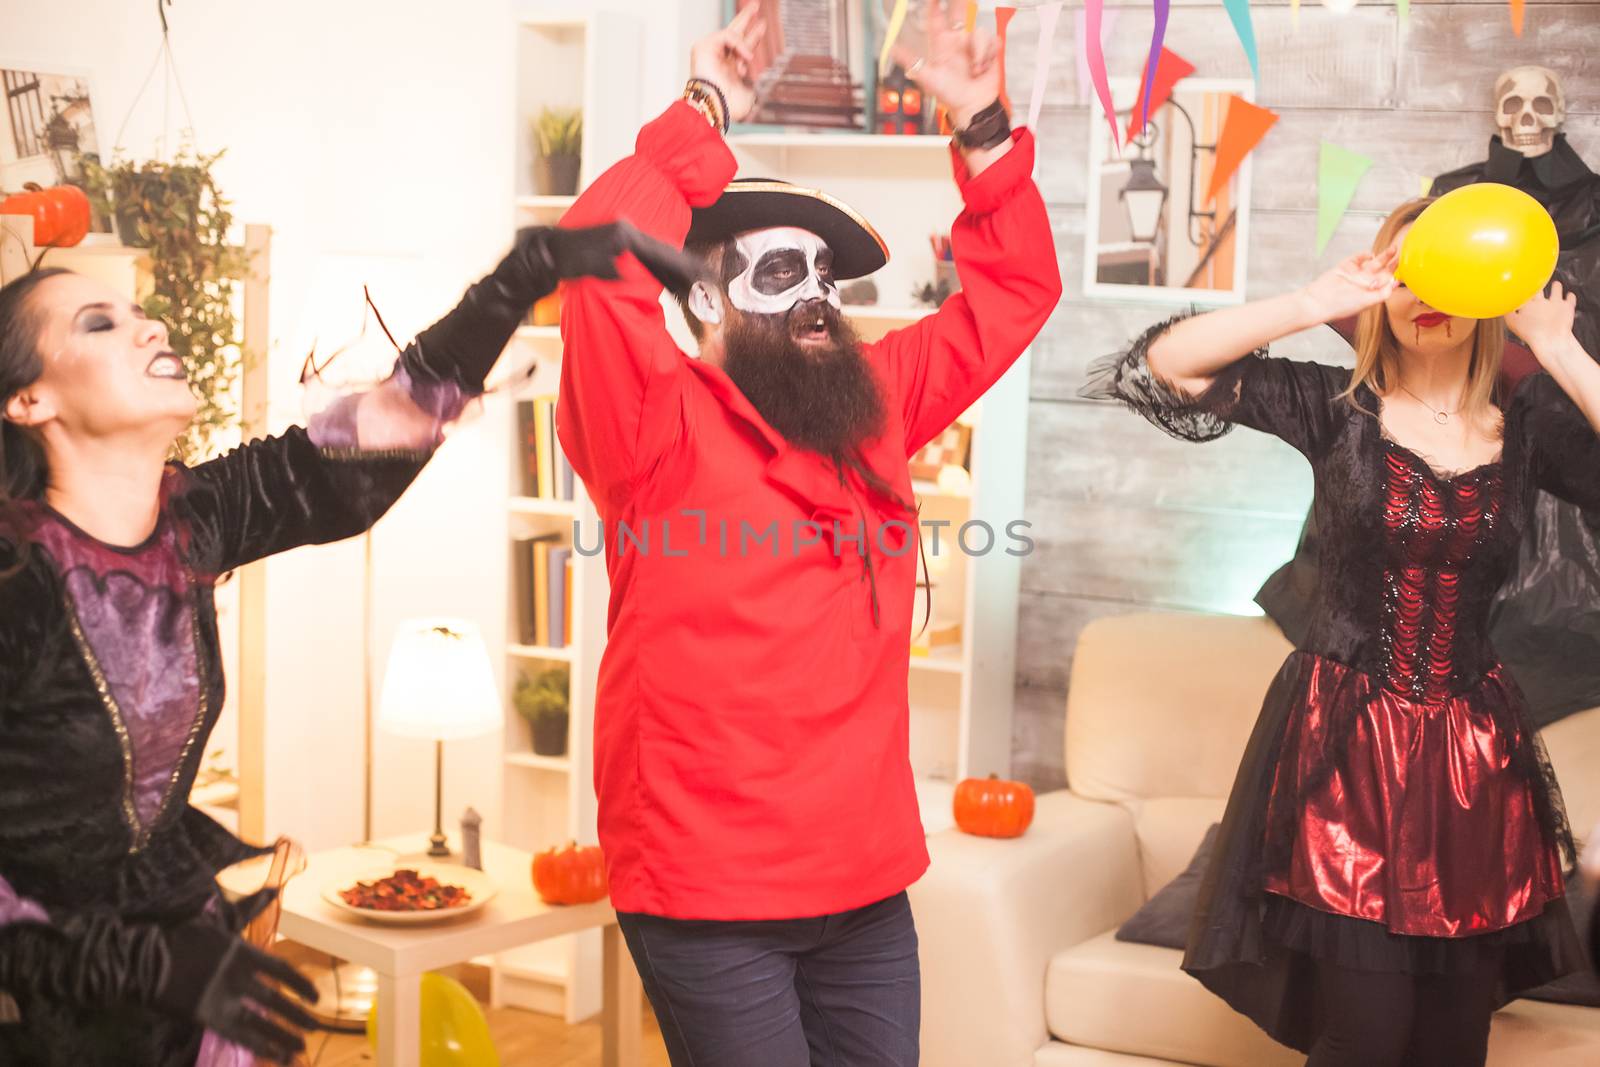 Man dressed up like bearded pirate dancing with hands up while celebrating halloween.